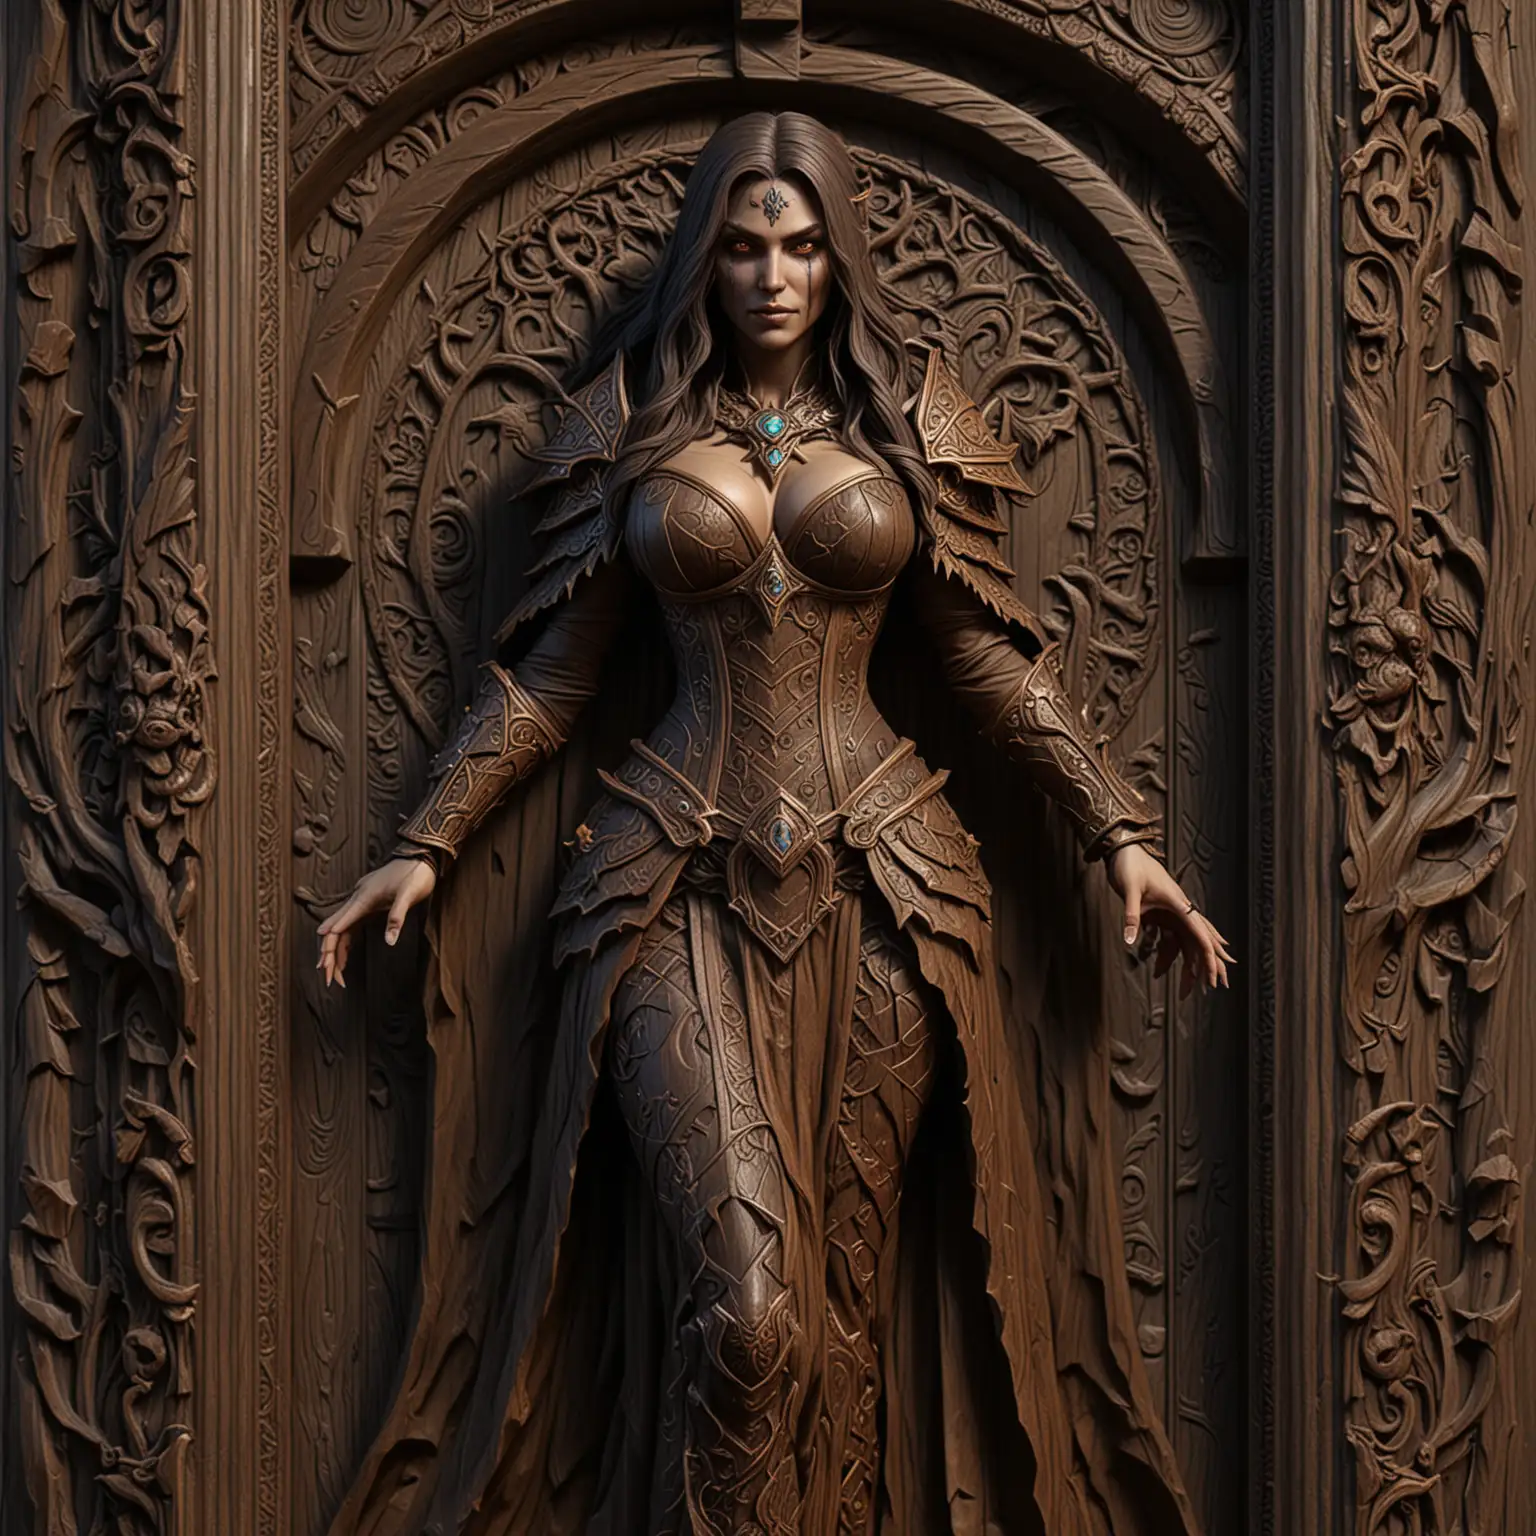 Dark-Carved-Wood-Frame-with-Undead-Female-Mage-in-World-of-Warcraft-Style